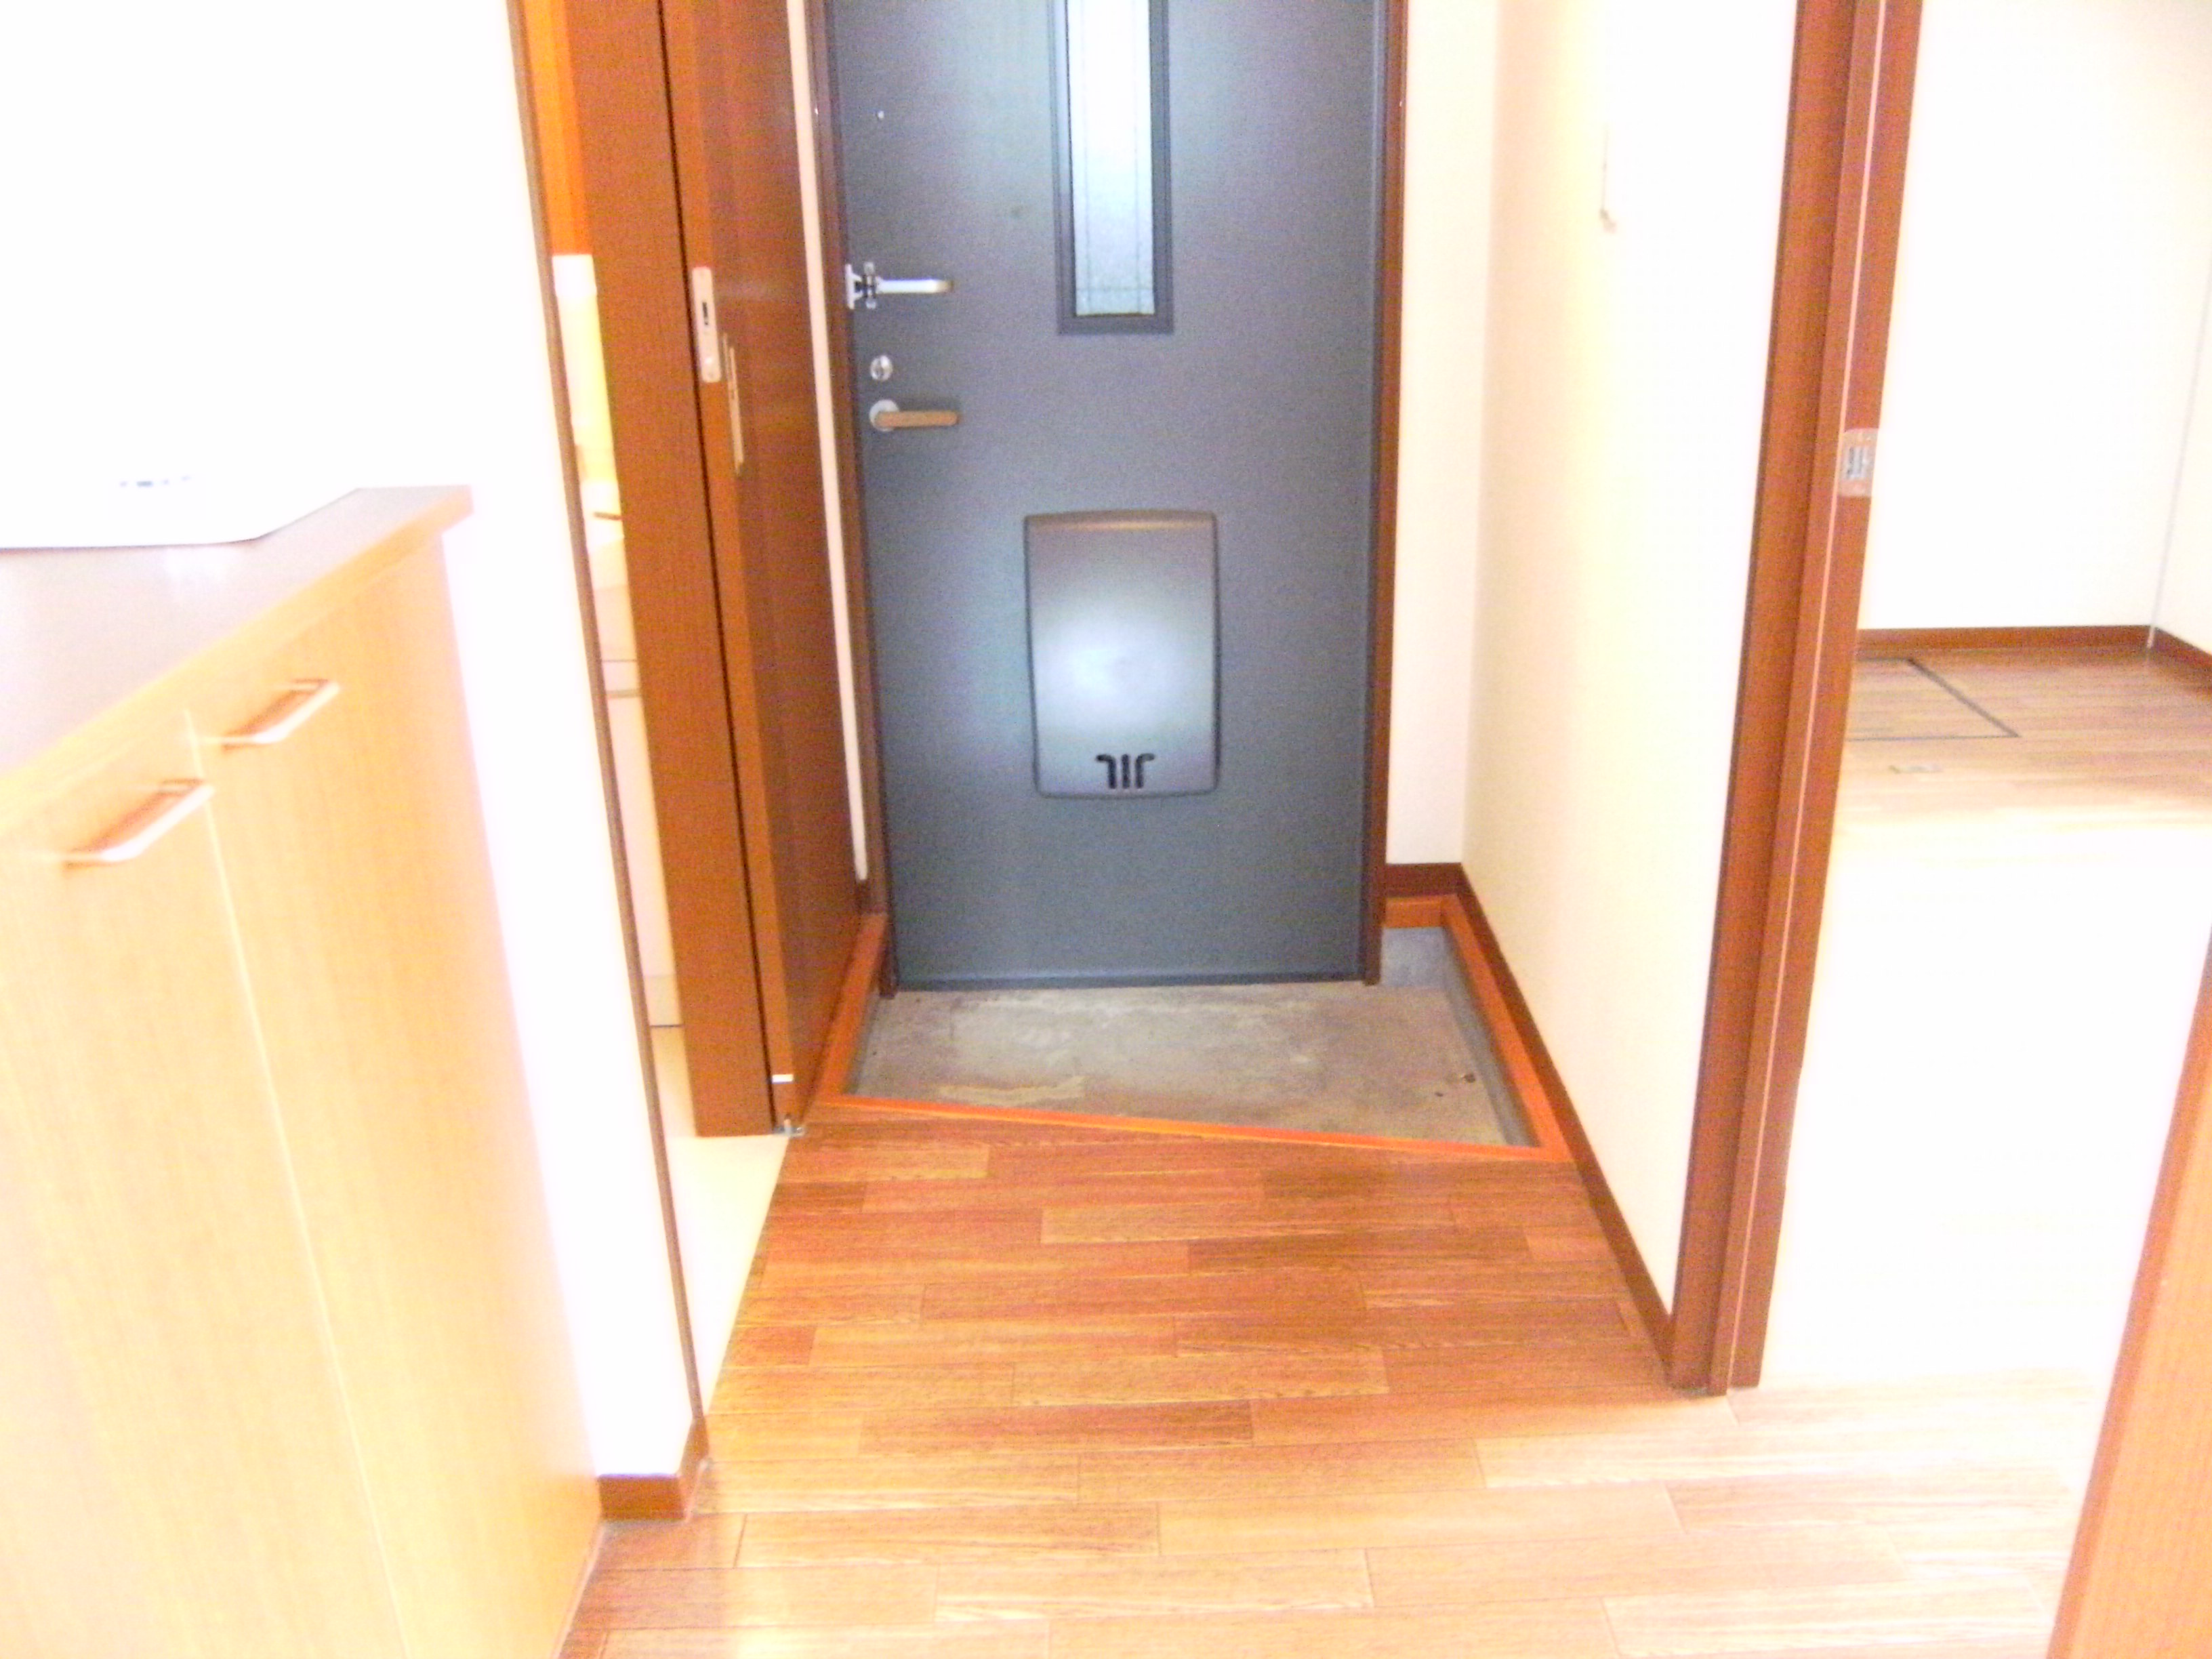 Entrance. It attaches footwear box (up and down) in the hallway part.